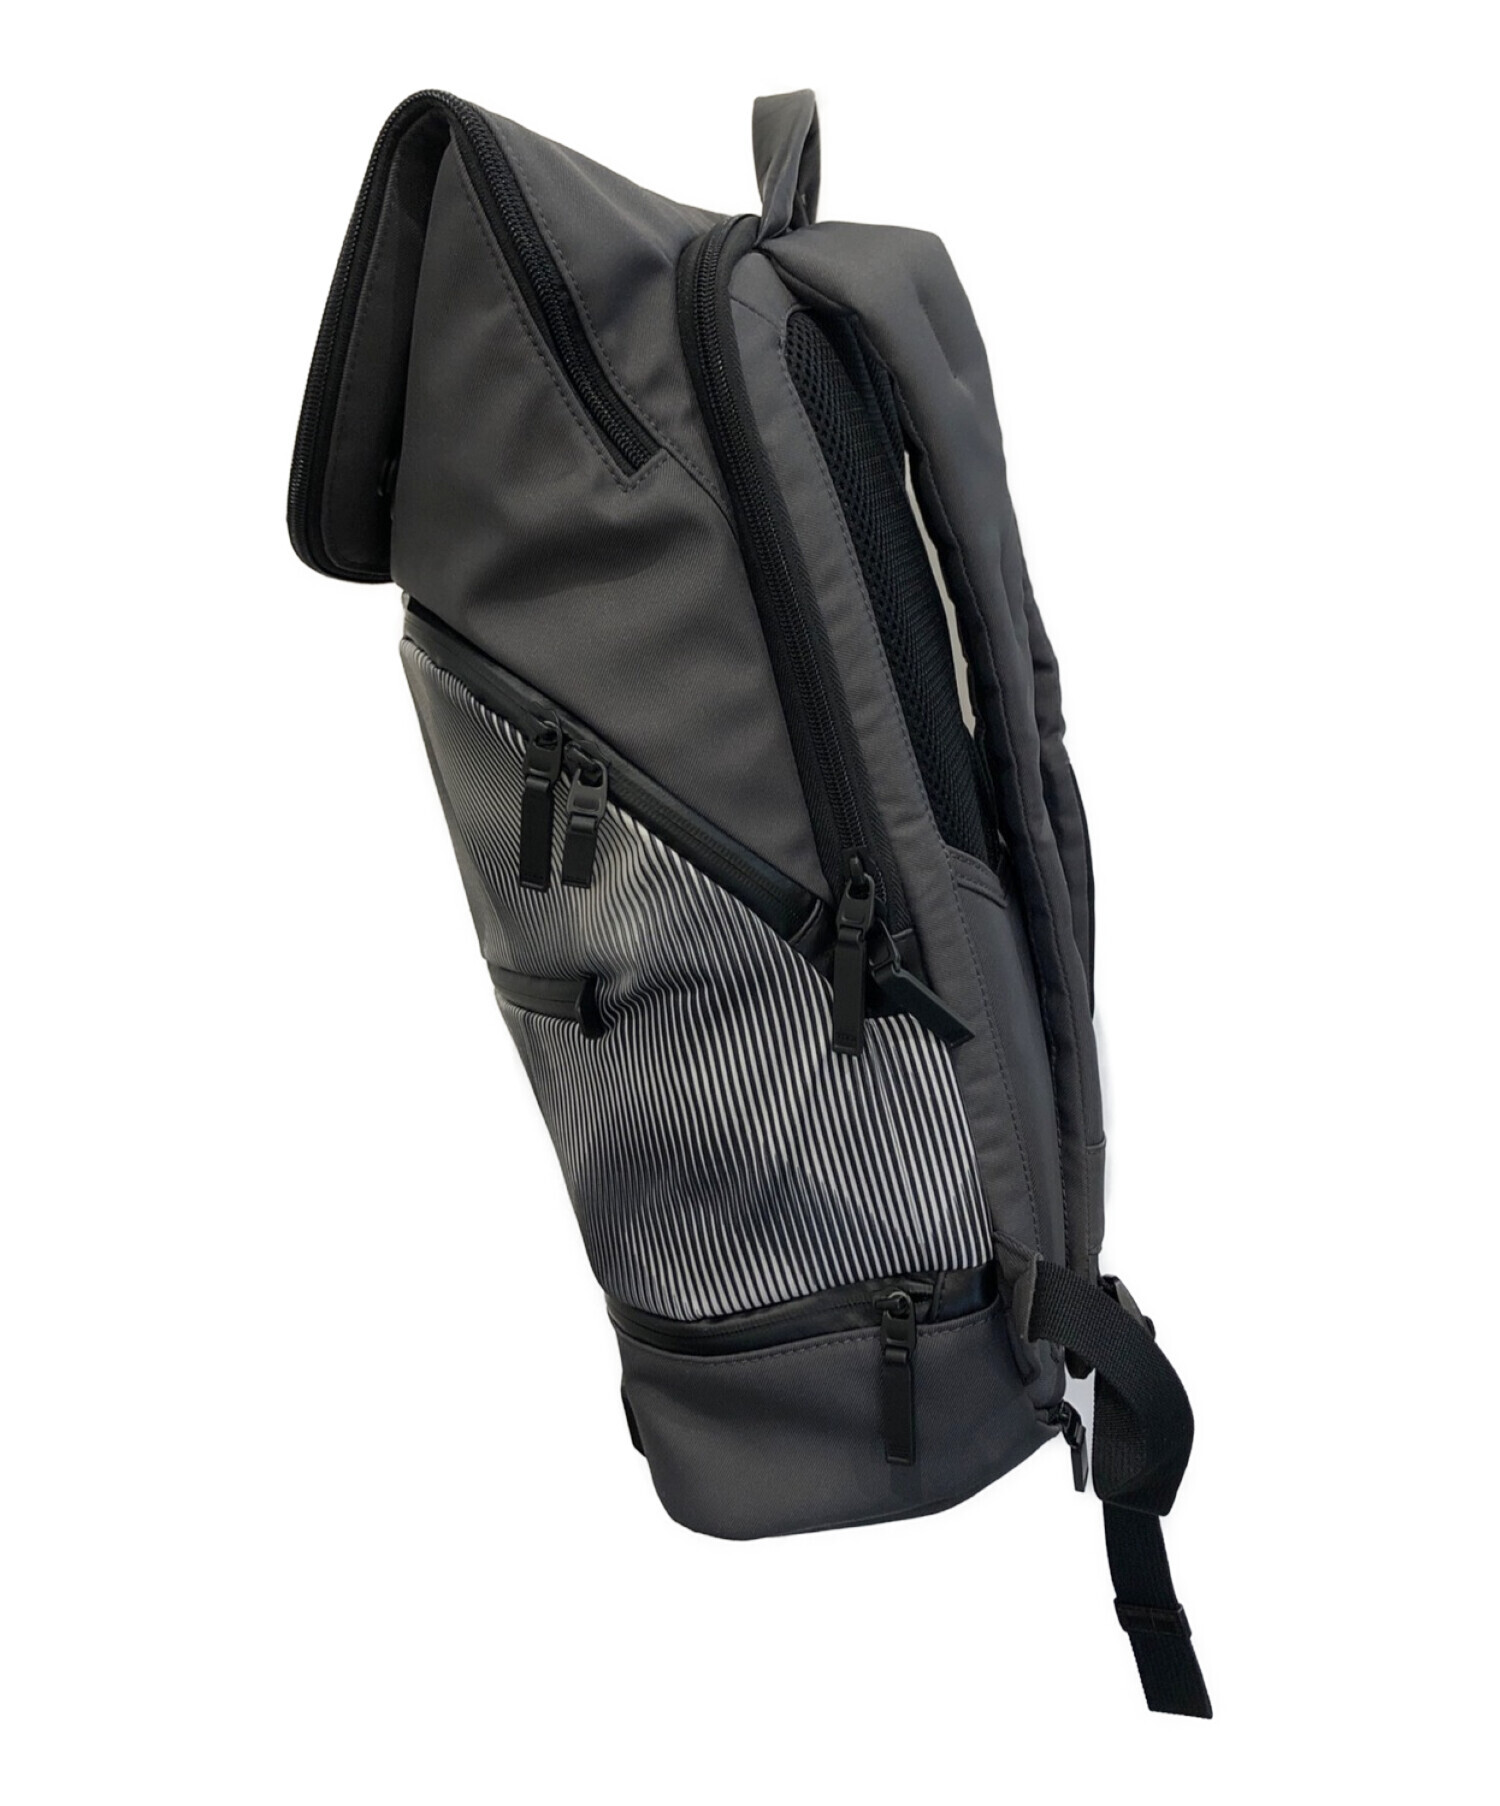 TUMI (トゥミ) FOREST FLAP BACKPACK グレー